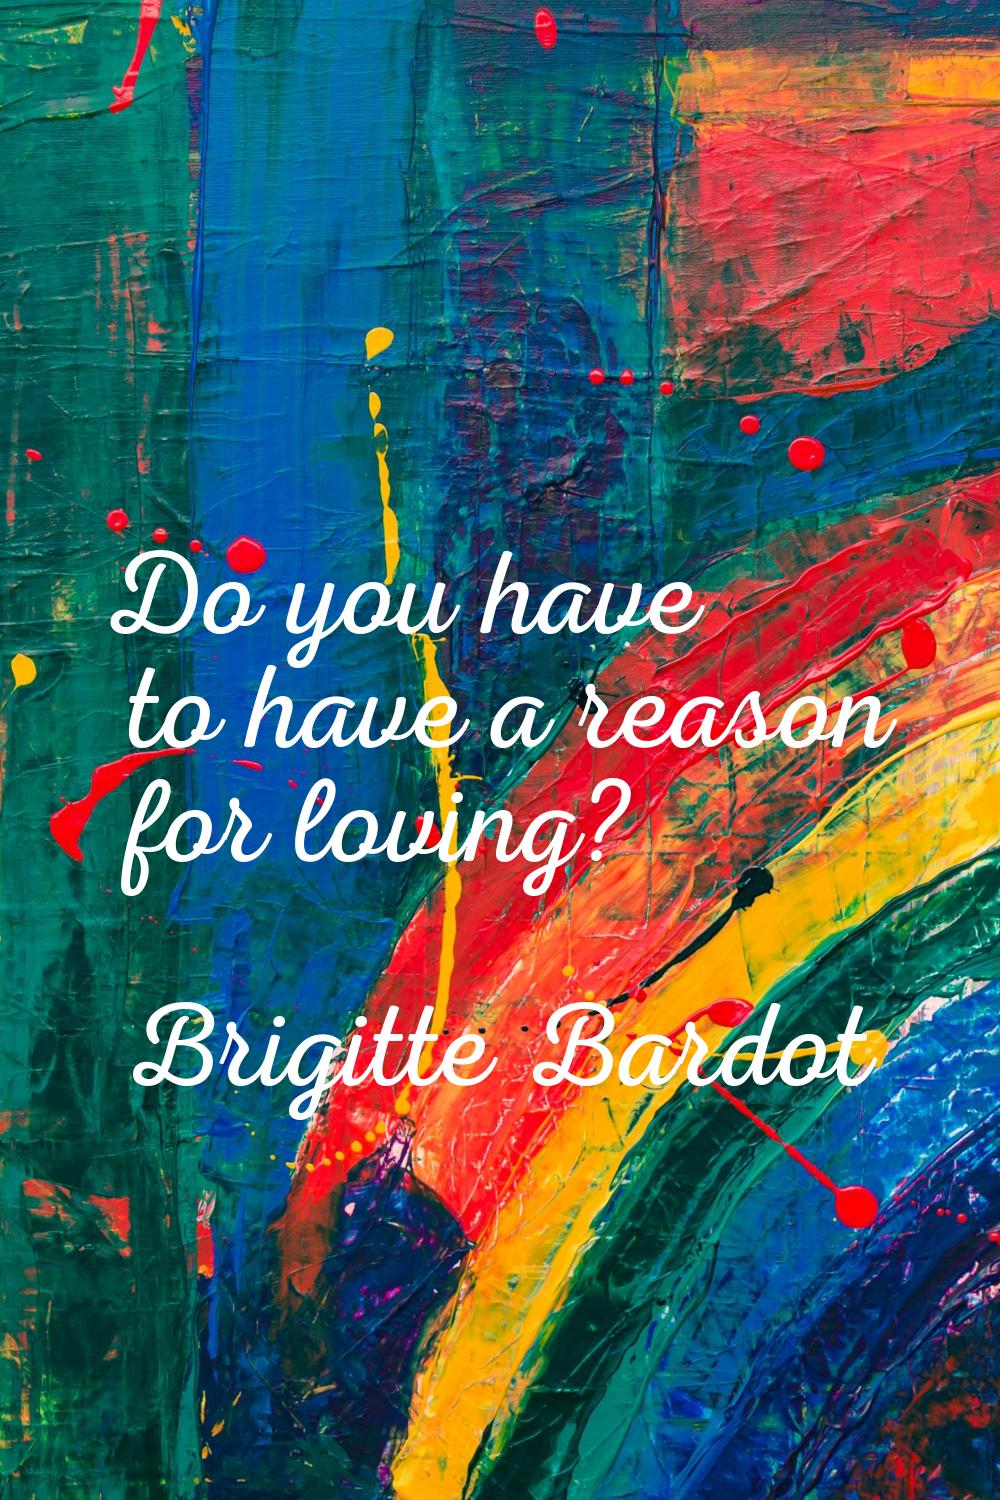 Do you have to have a reason for loving?